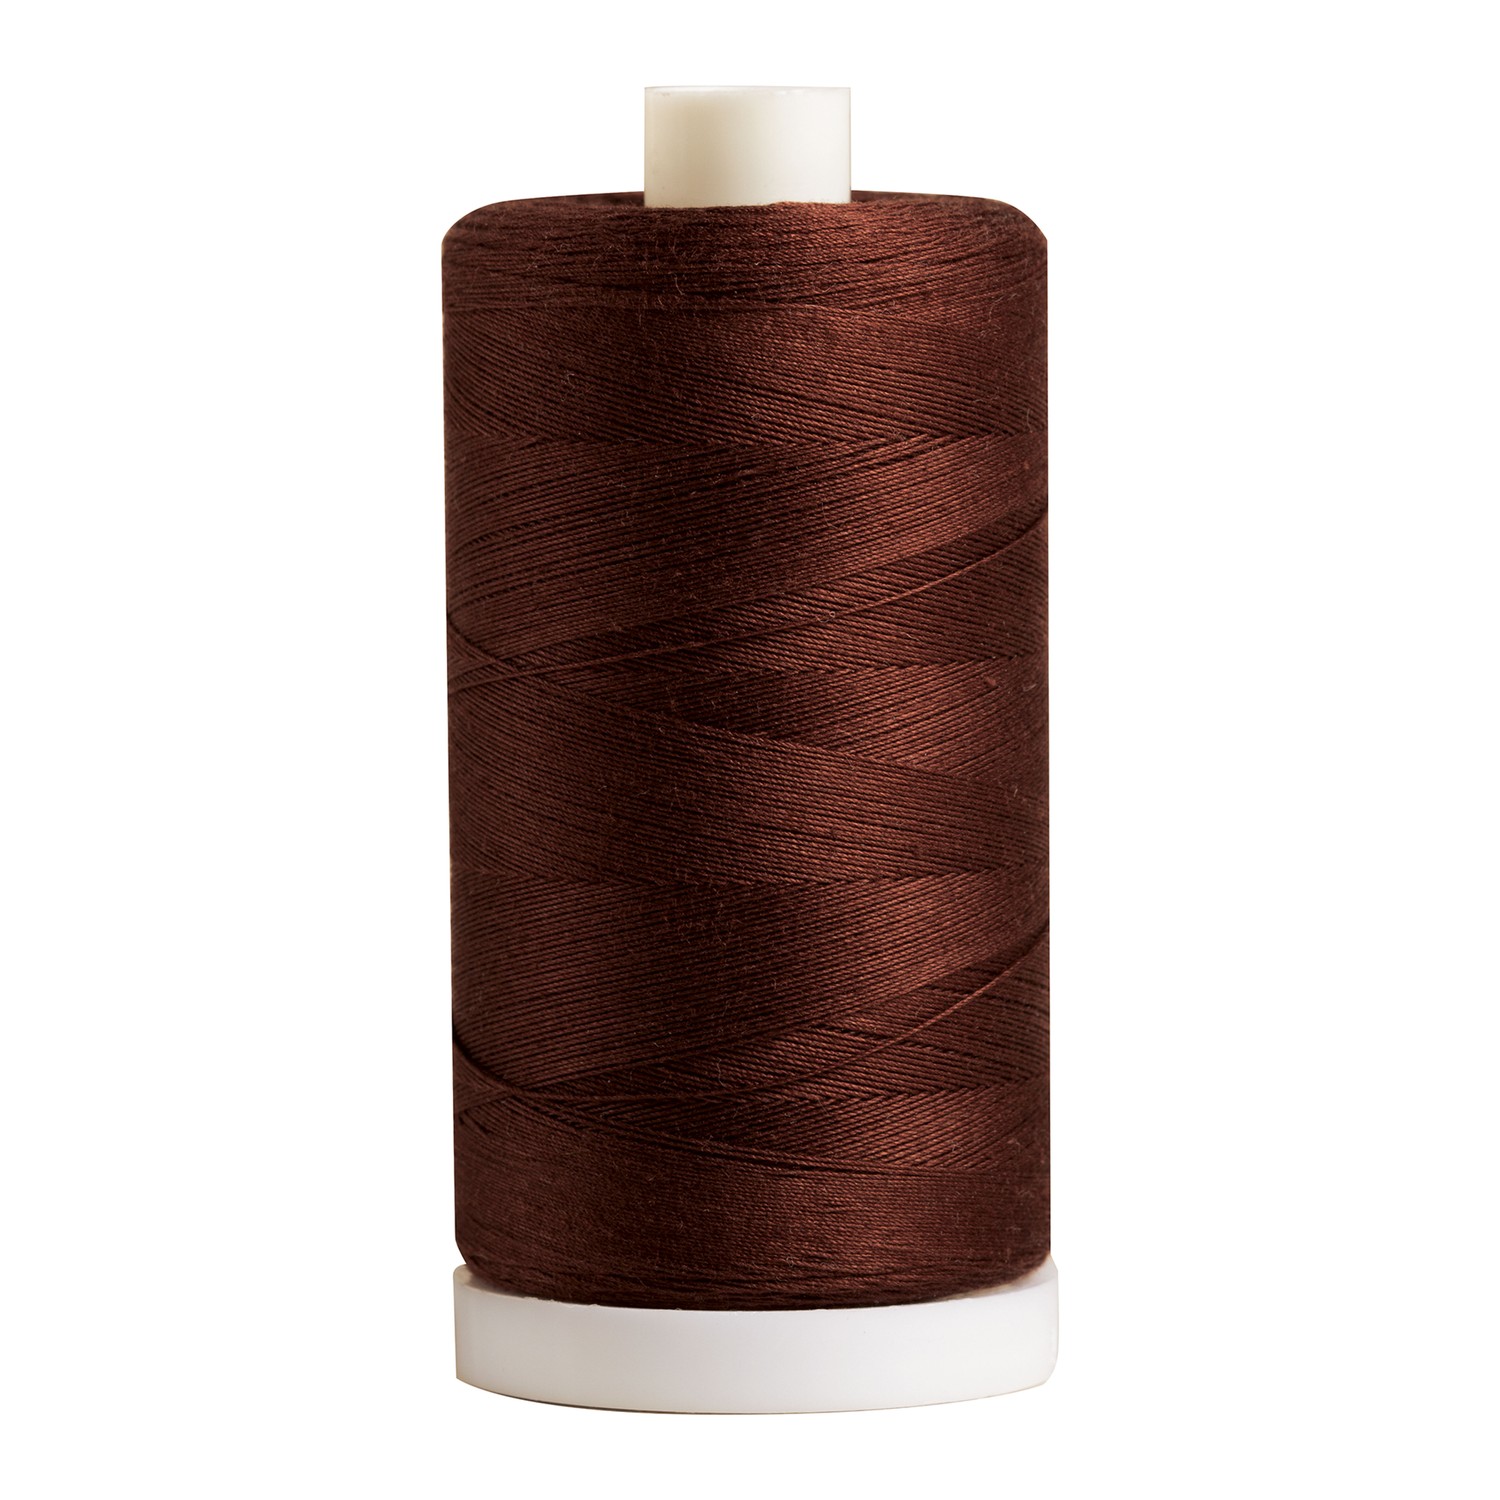 Red, Yellow, + Brown Thread Bundle - 16 Spools